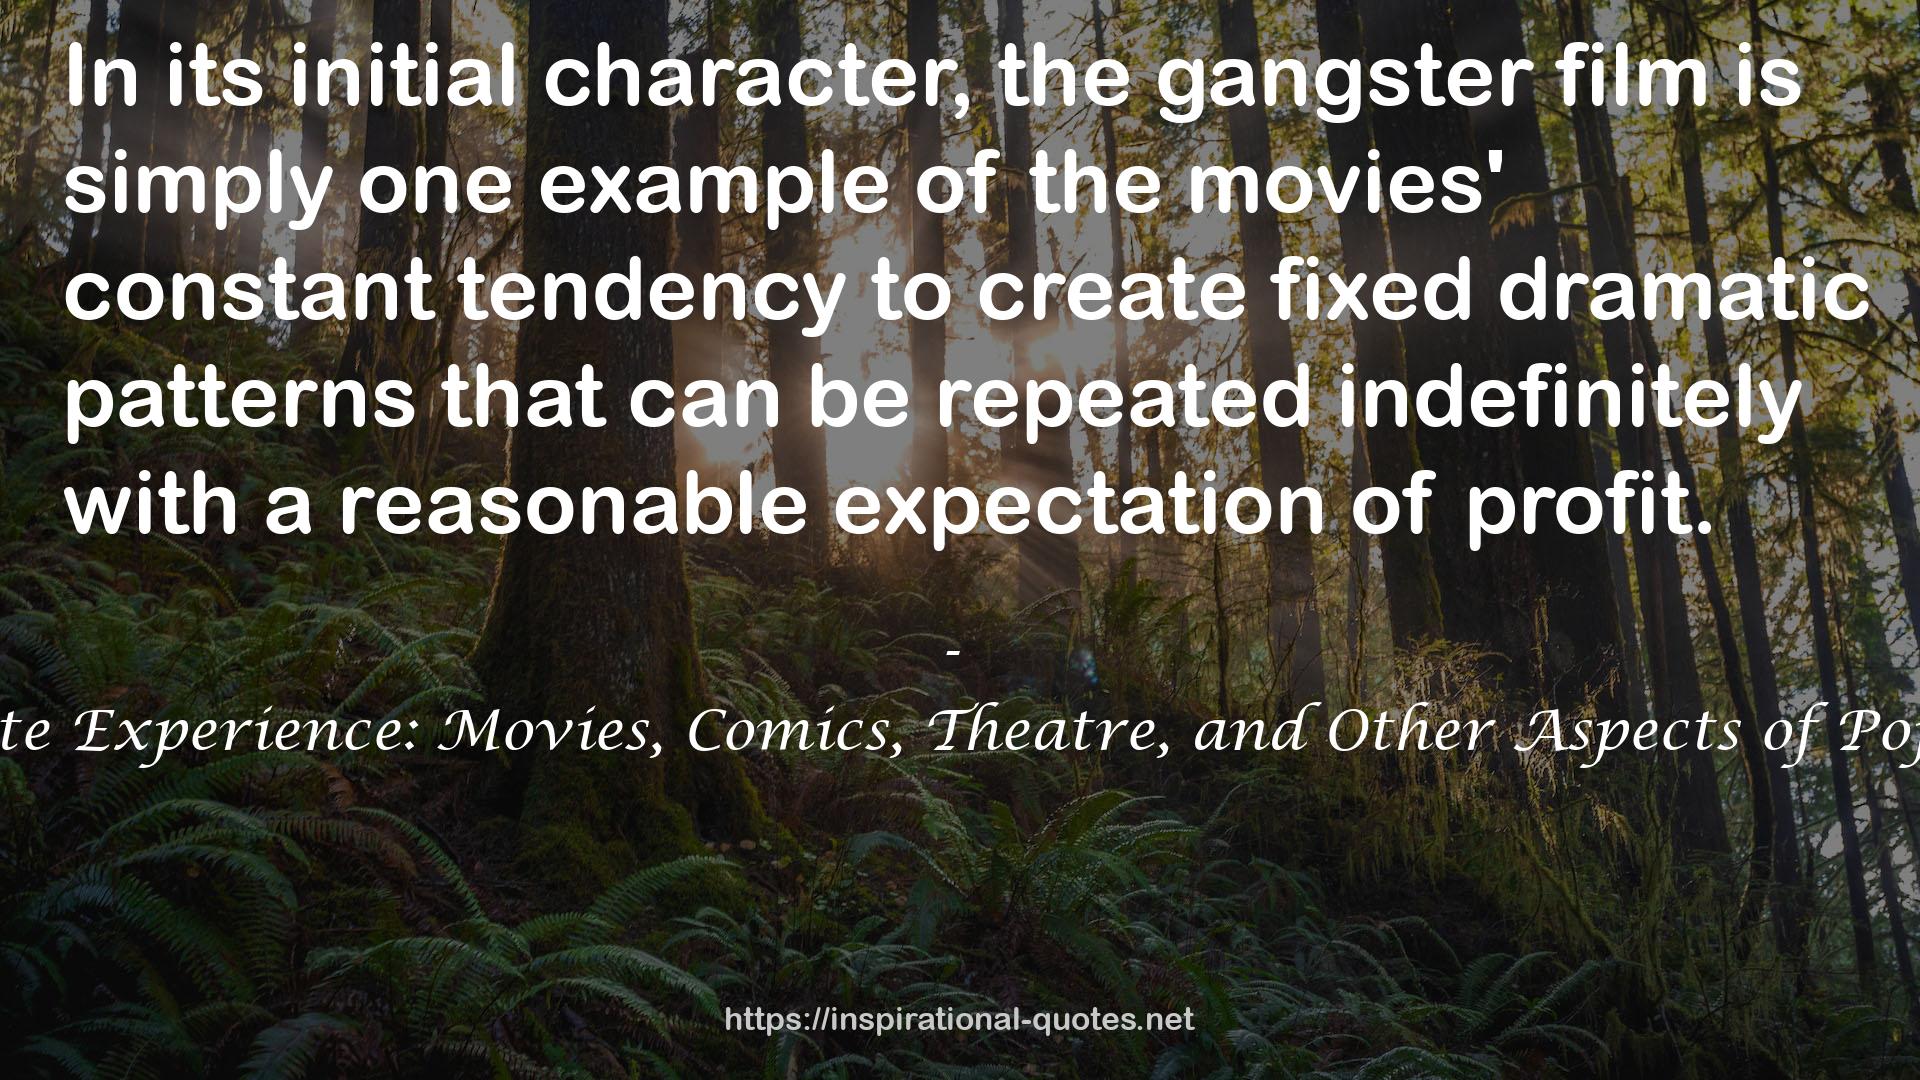 The Immediate Experience: Movies, Comics, Theatre, and Other Aspects of Popular Culture QUOTES